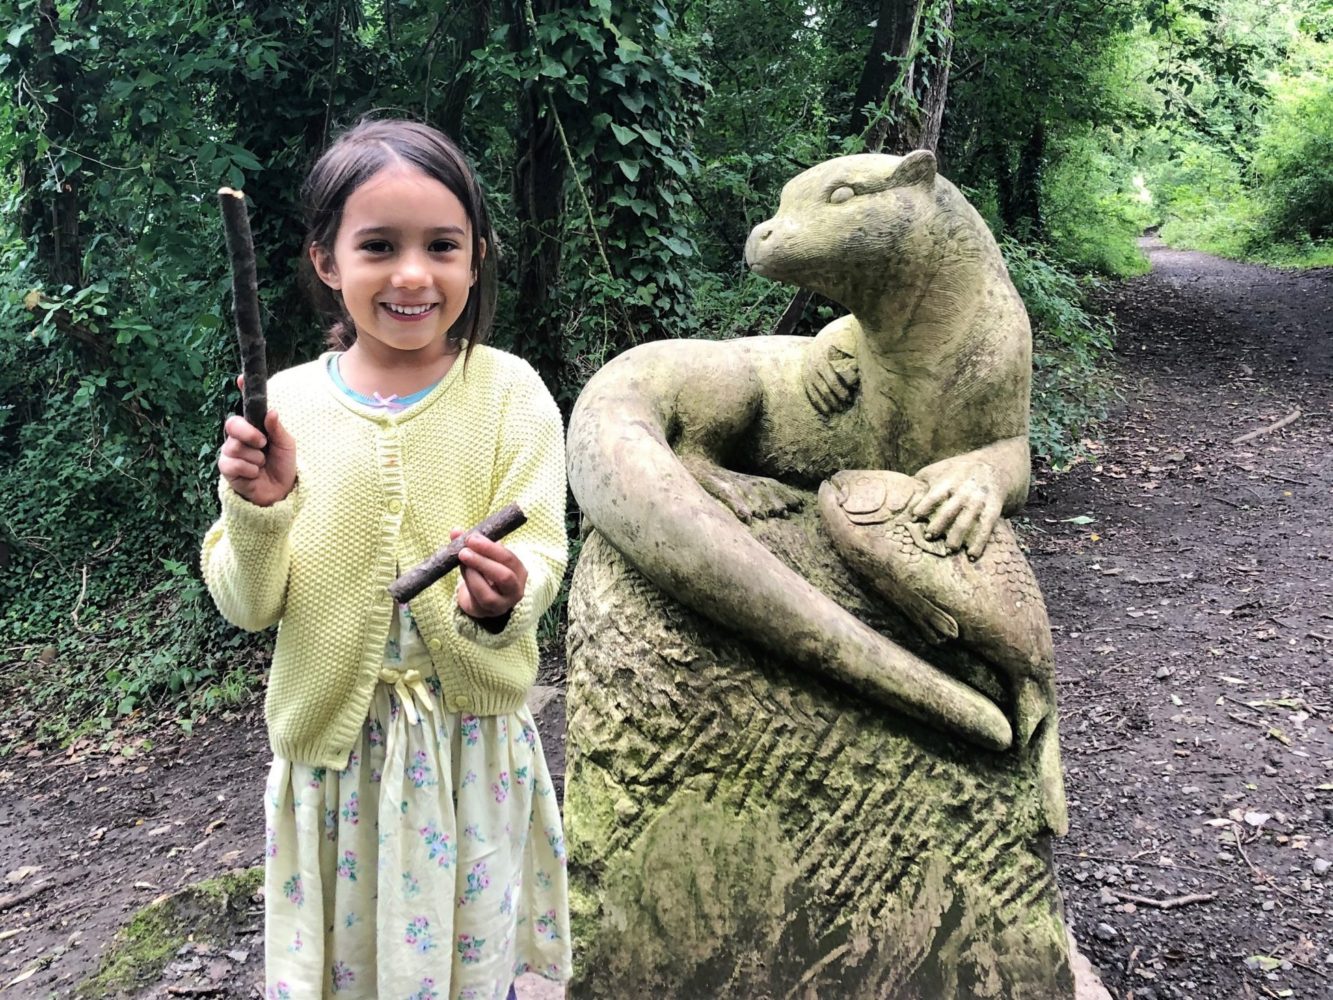 Otter Scultpure at The Ribble Valley Sculpture Trail - One of the family-friendly art walks in the North West